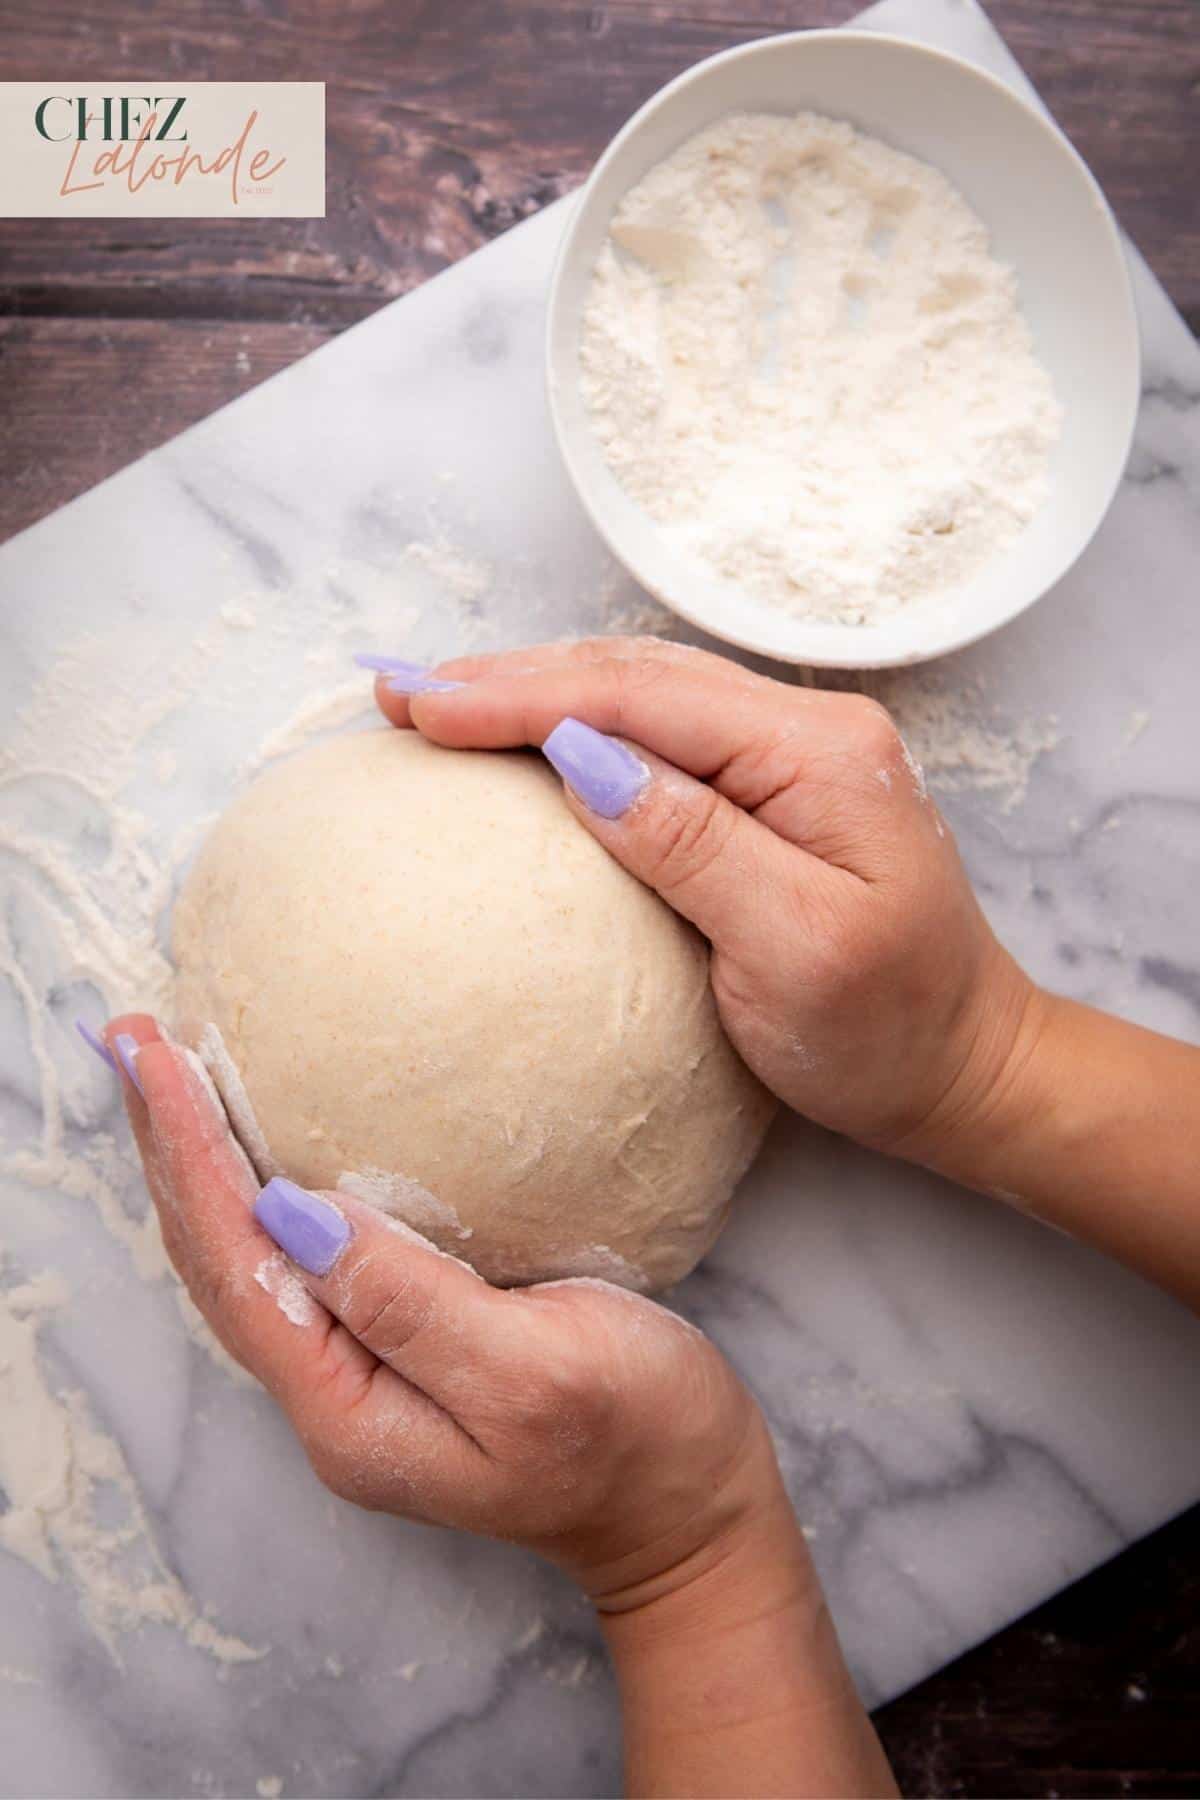 After kneading the dough in the stand mixer, transfer it to a floured kitchen counter and shape it into a ball by hand.